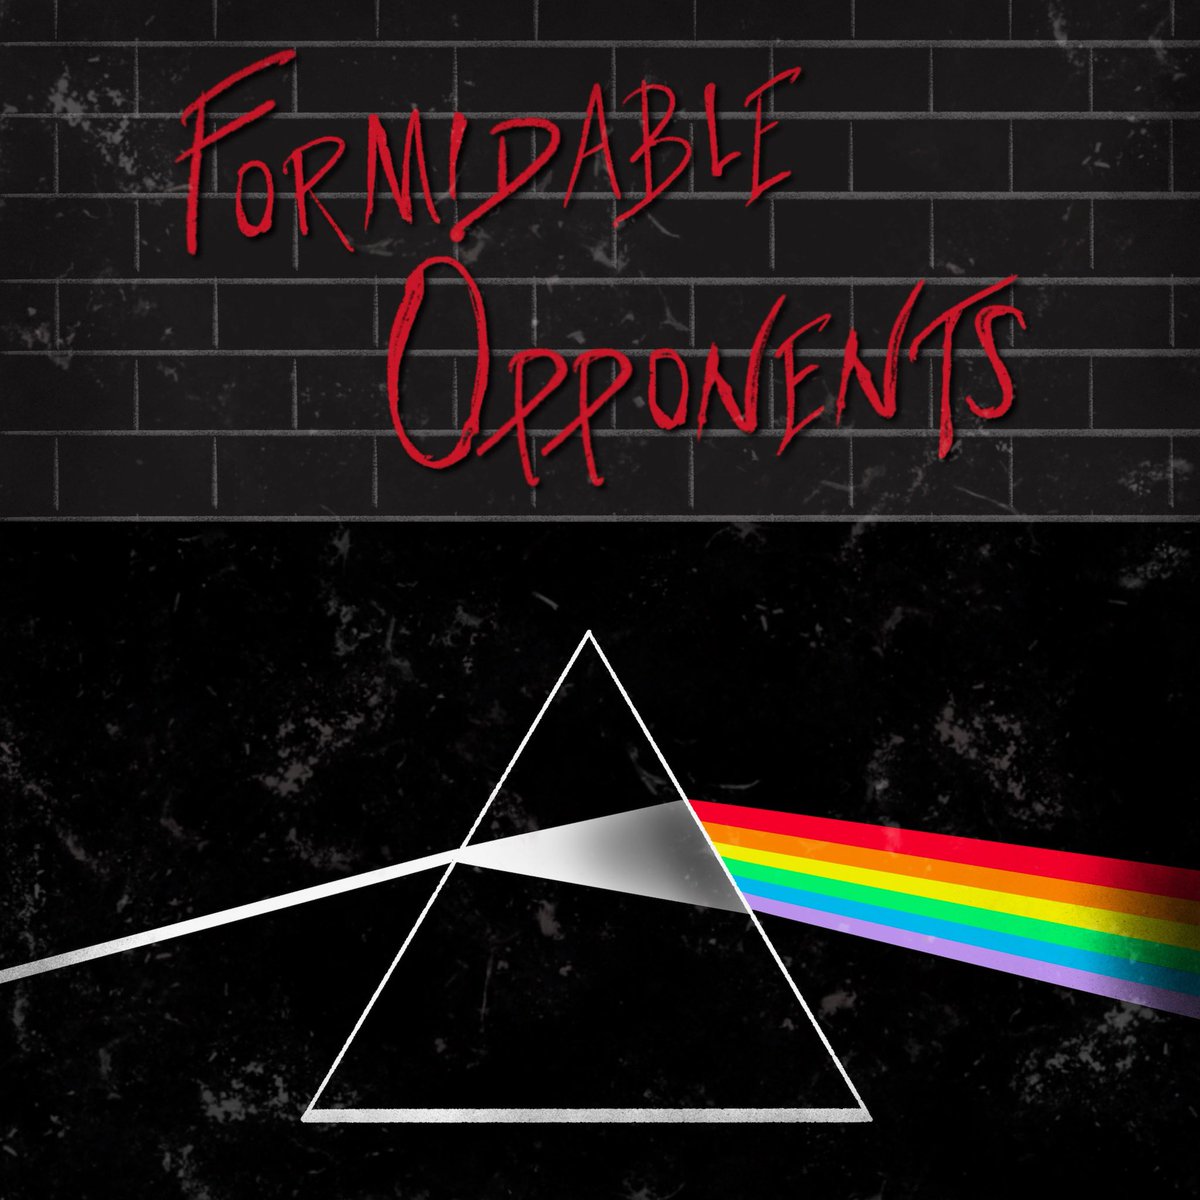 New Episode Now Available!  Best “Pink Floyd Song.”  Check us out anywhere you listen to podcasts.

#pinkfloyd #music #rock #70s #80s #popculture #nostalgia #musiccommentary #comedy #podcast #podcastingcommunity #formidableopponents #newepisode #music #memories